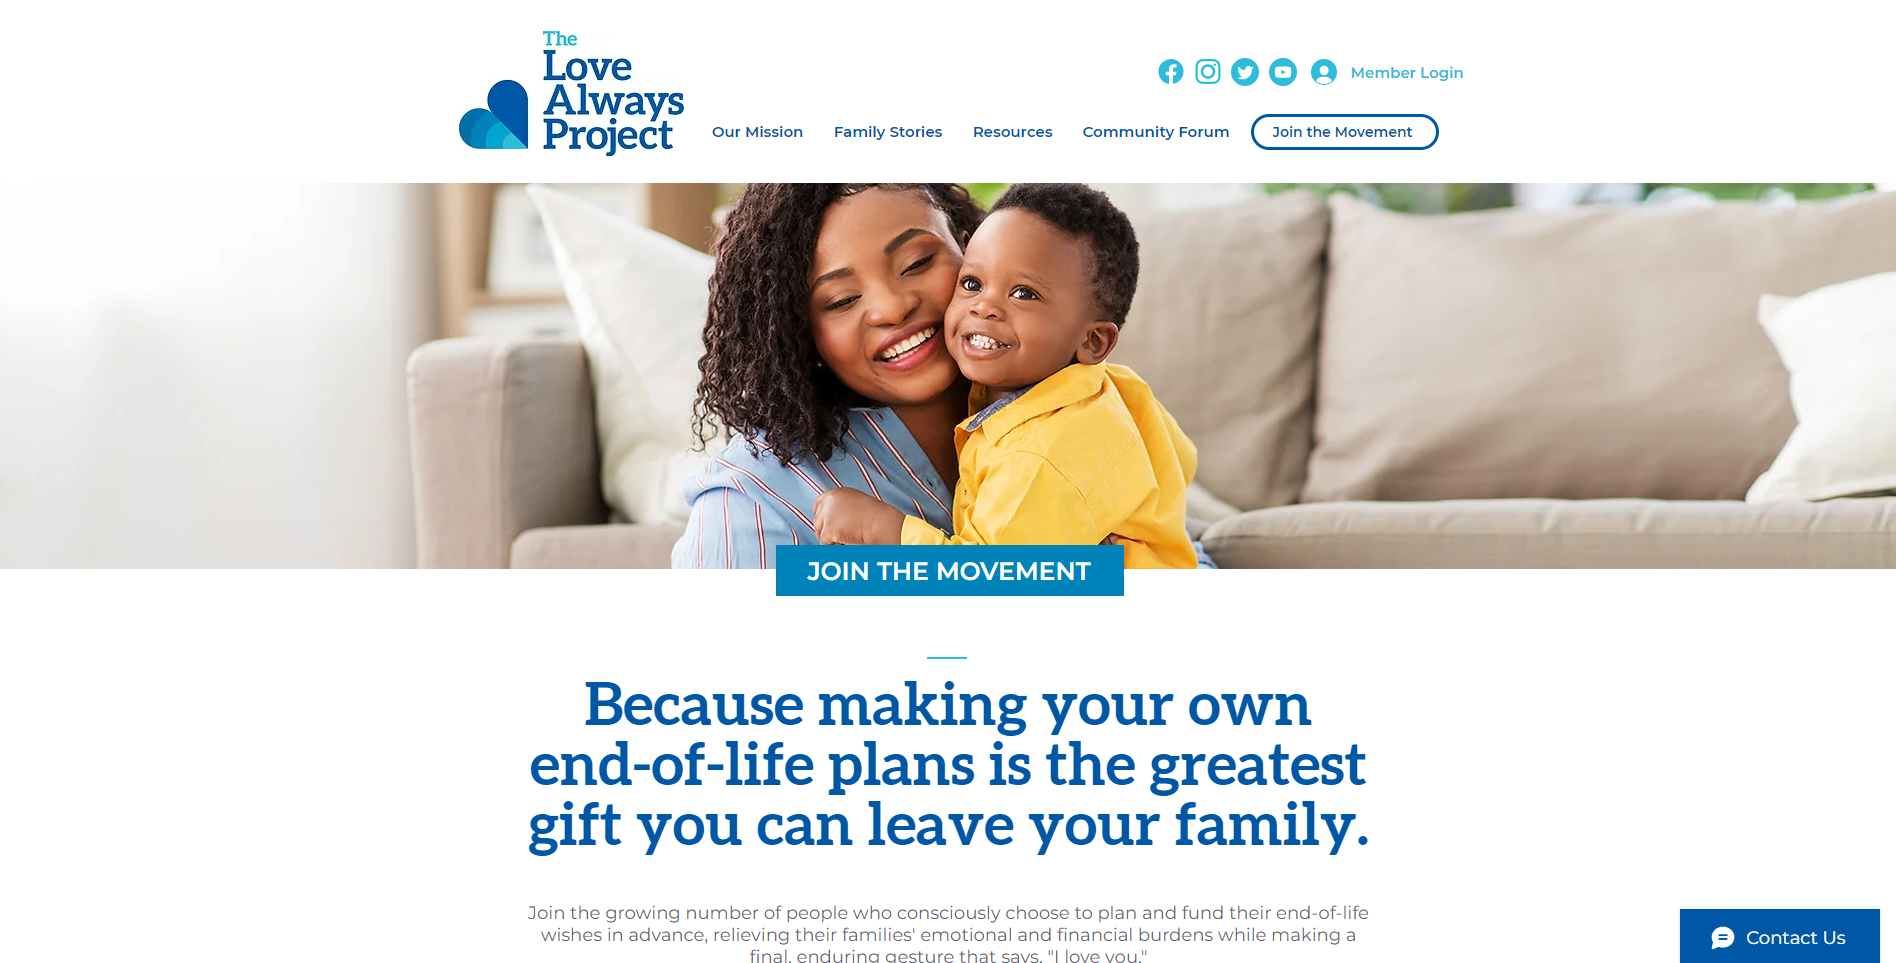 Because making your own end-of-life plans is the greatest gift you can leave your family